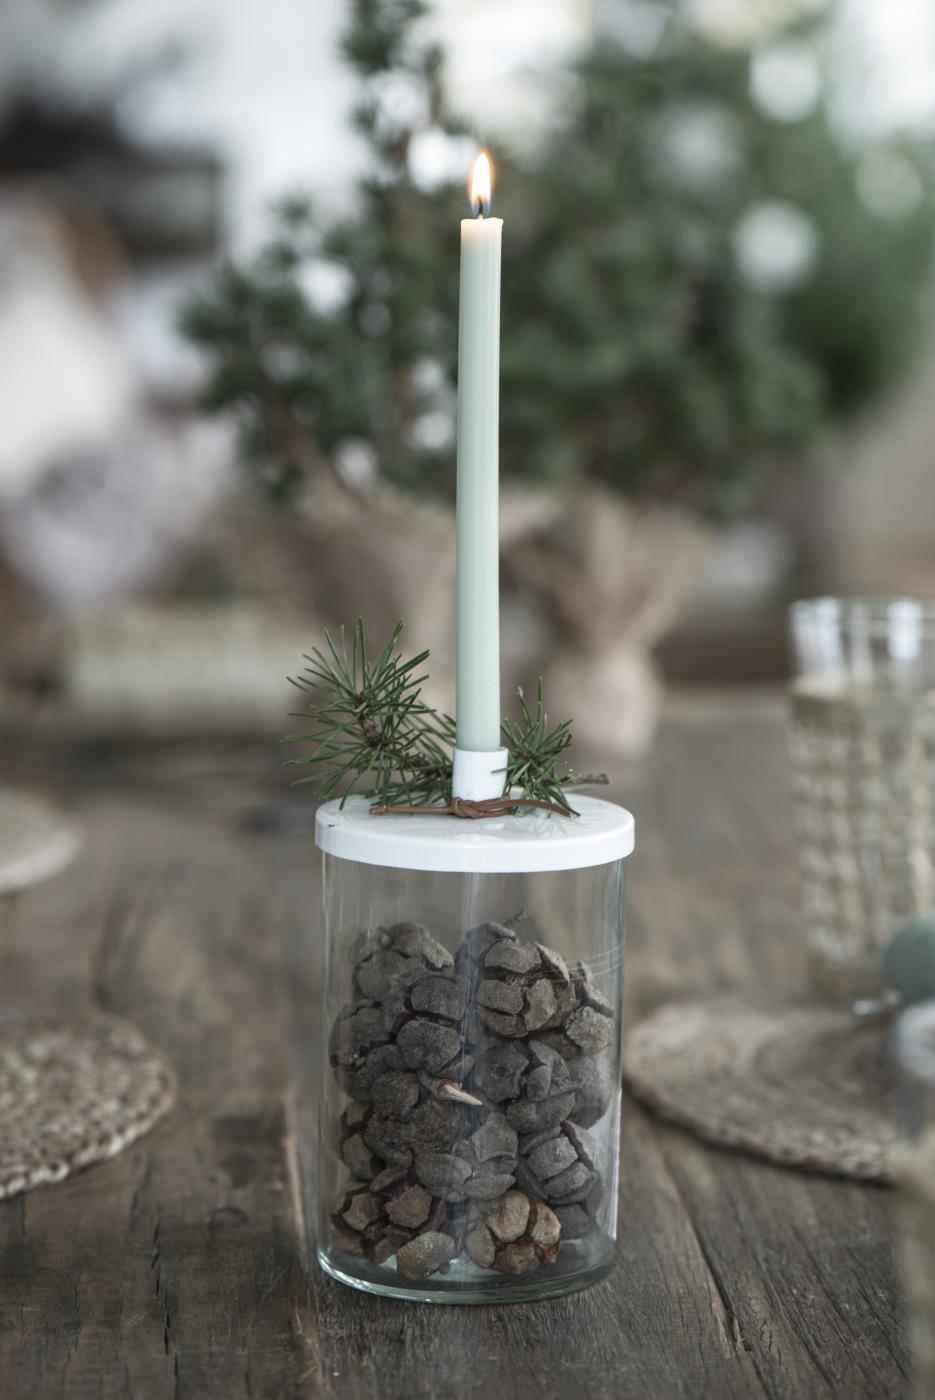 Glass For Thin Candle Metal Cover-White